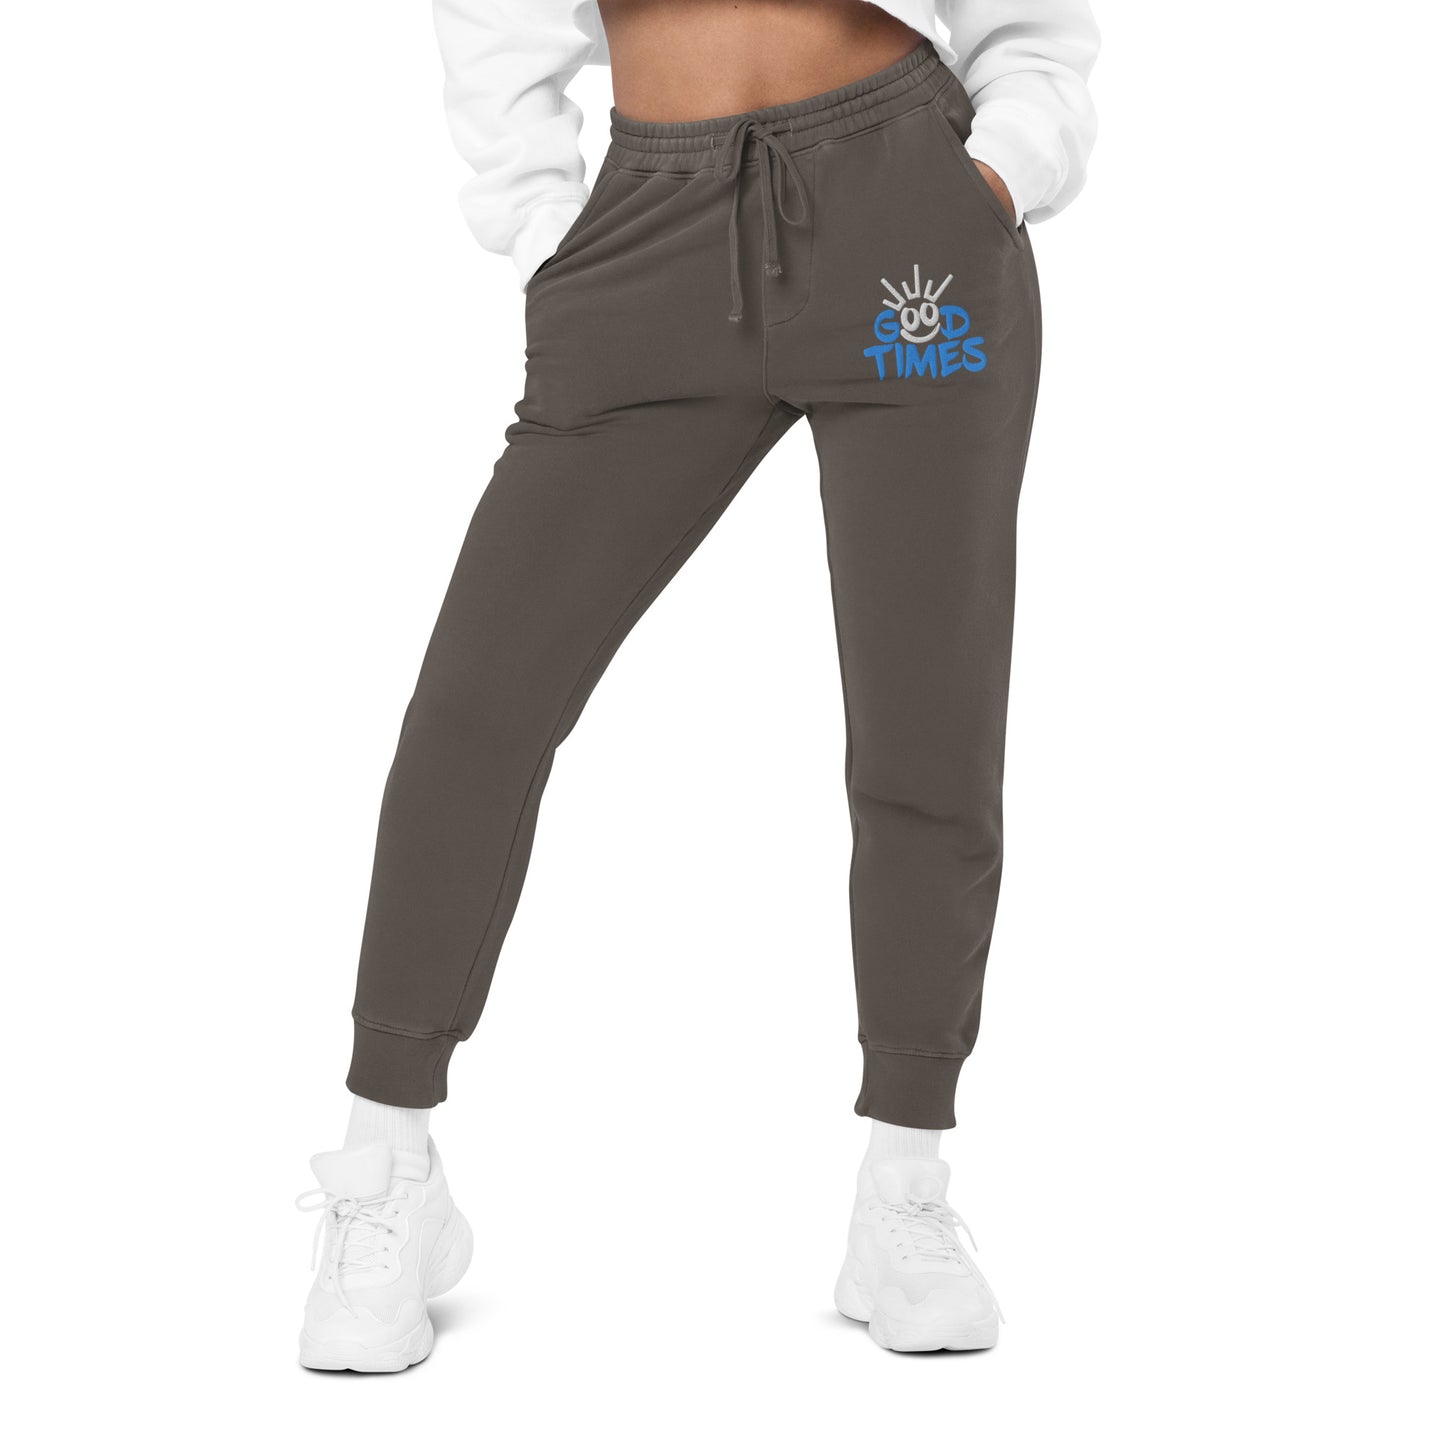 Good Times Unisex Embroidered Pigment-dyed Sweatpants